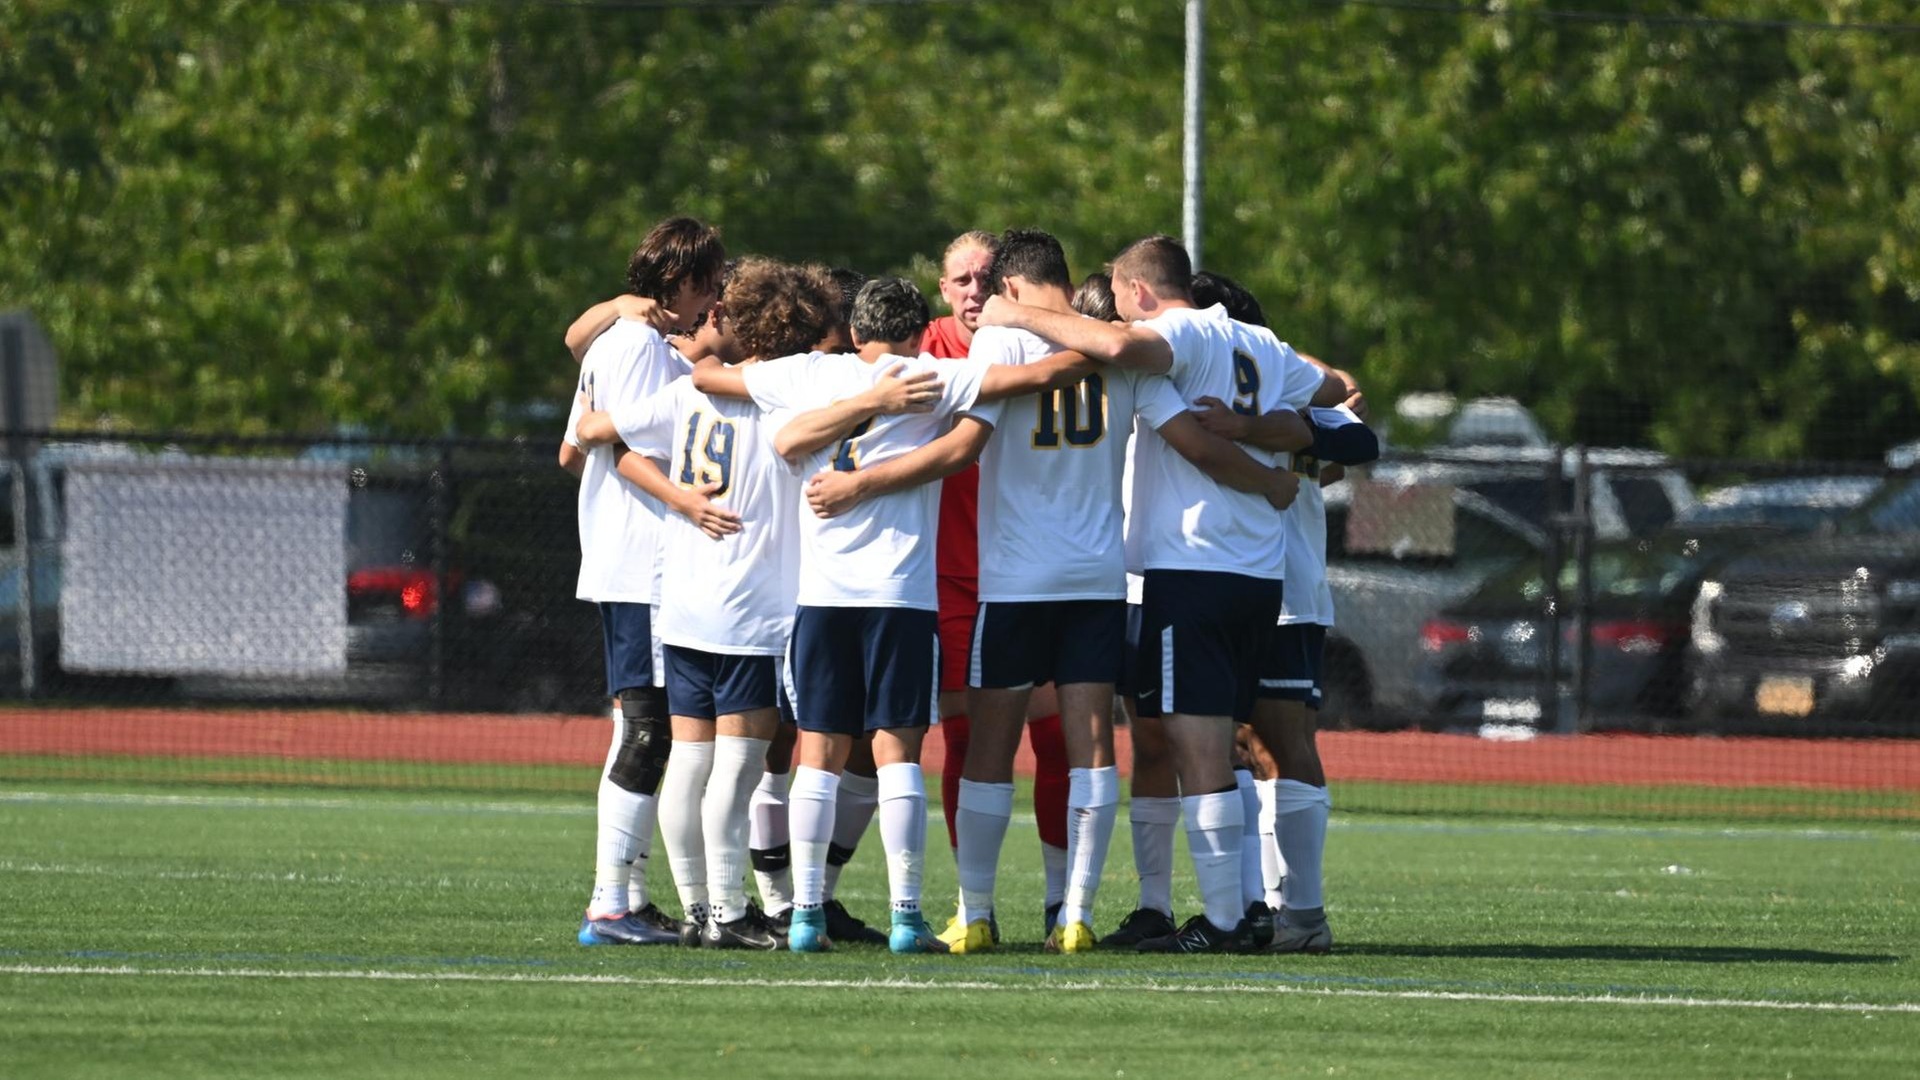 Men's Soccer Drops Skyline Contest to USMMA on Saturday